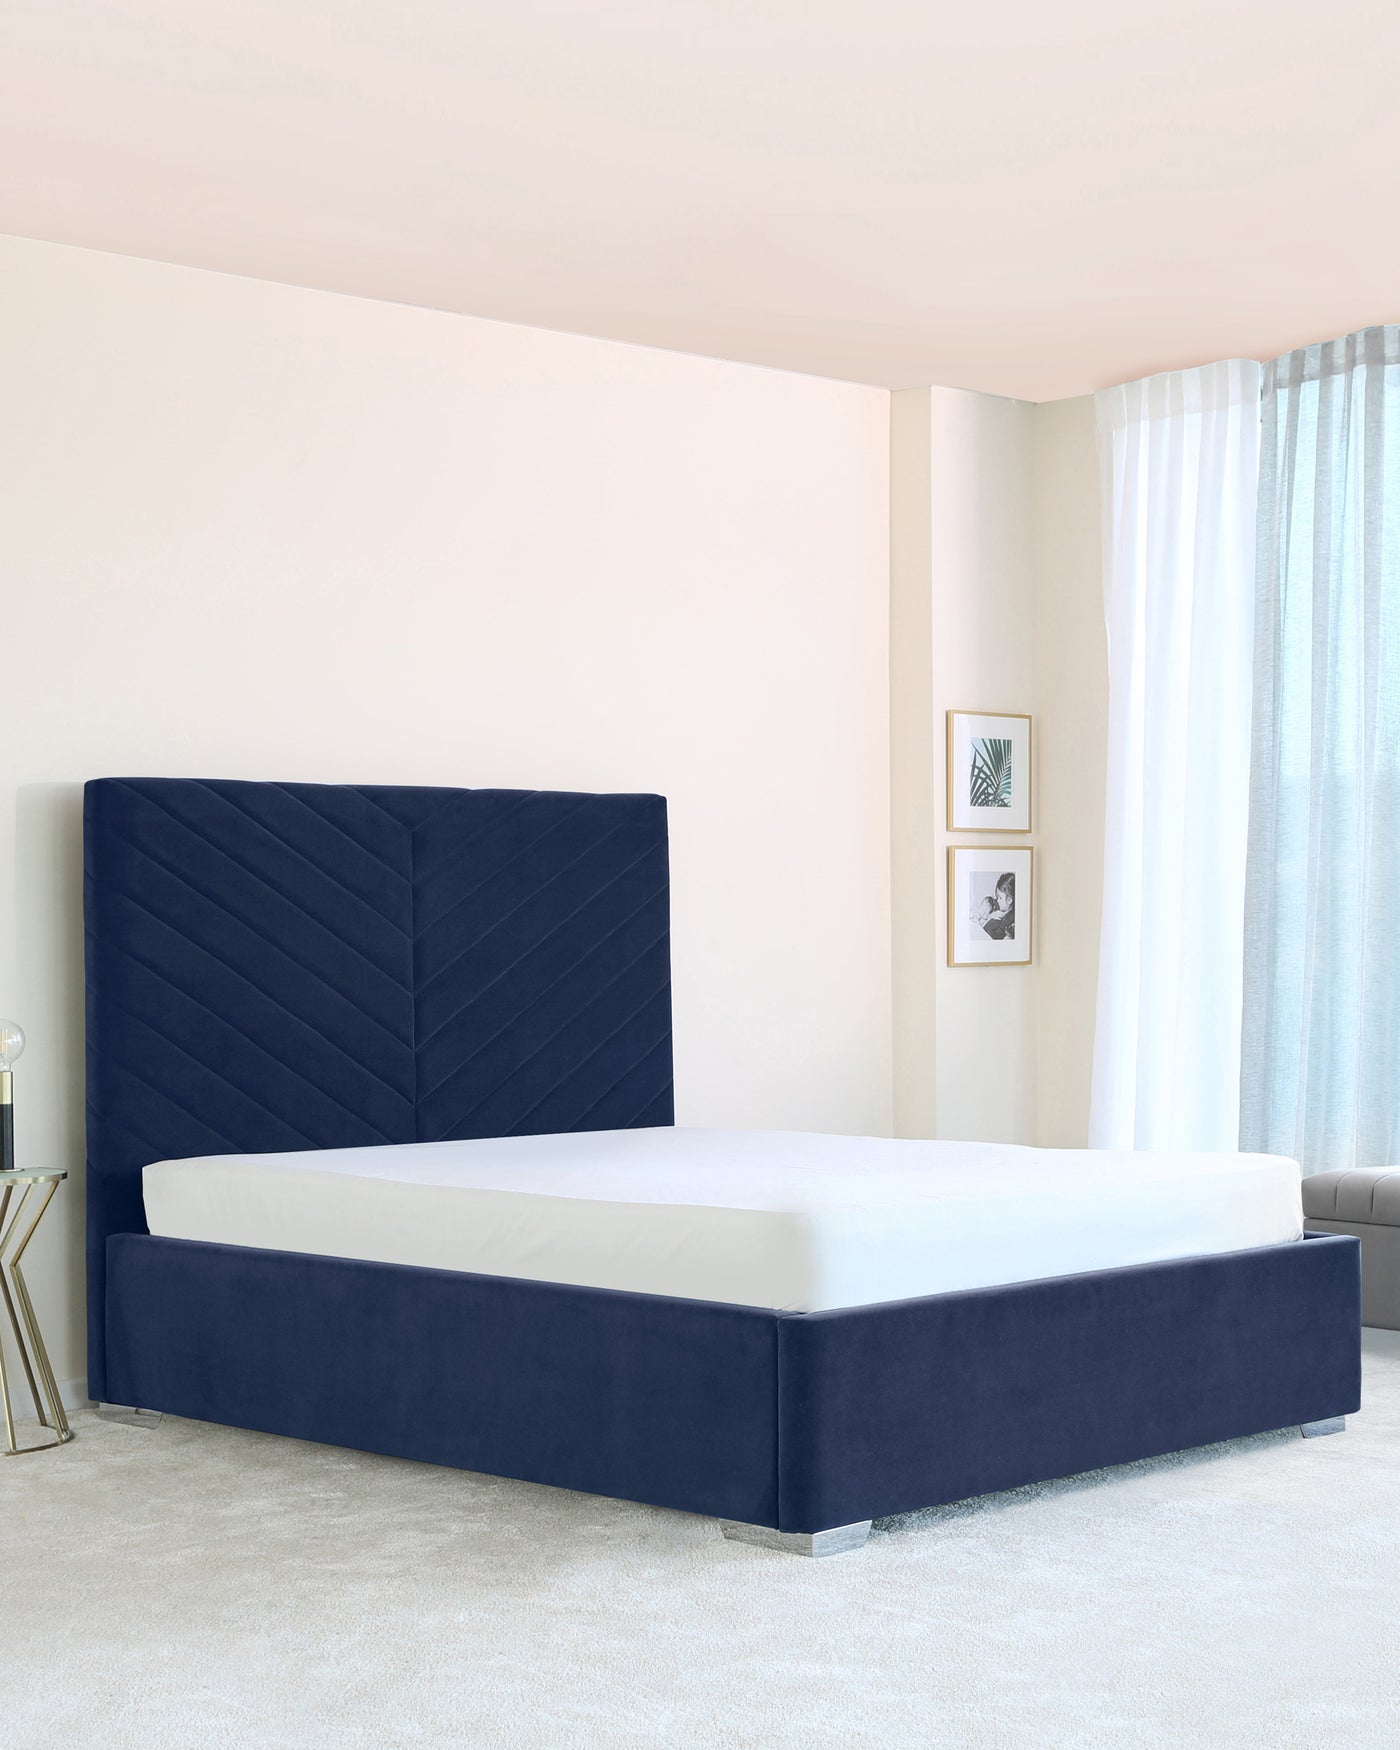 Contemporary navy blue upholstered platform bed featuring a tall, wingback-style headboard with geometric-patterned tufting, set in a light and airy bedroom with minimal decor.